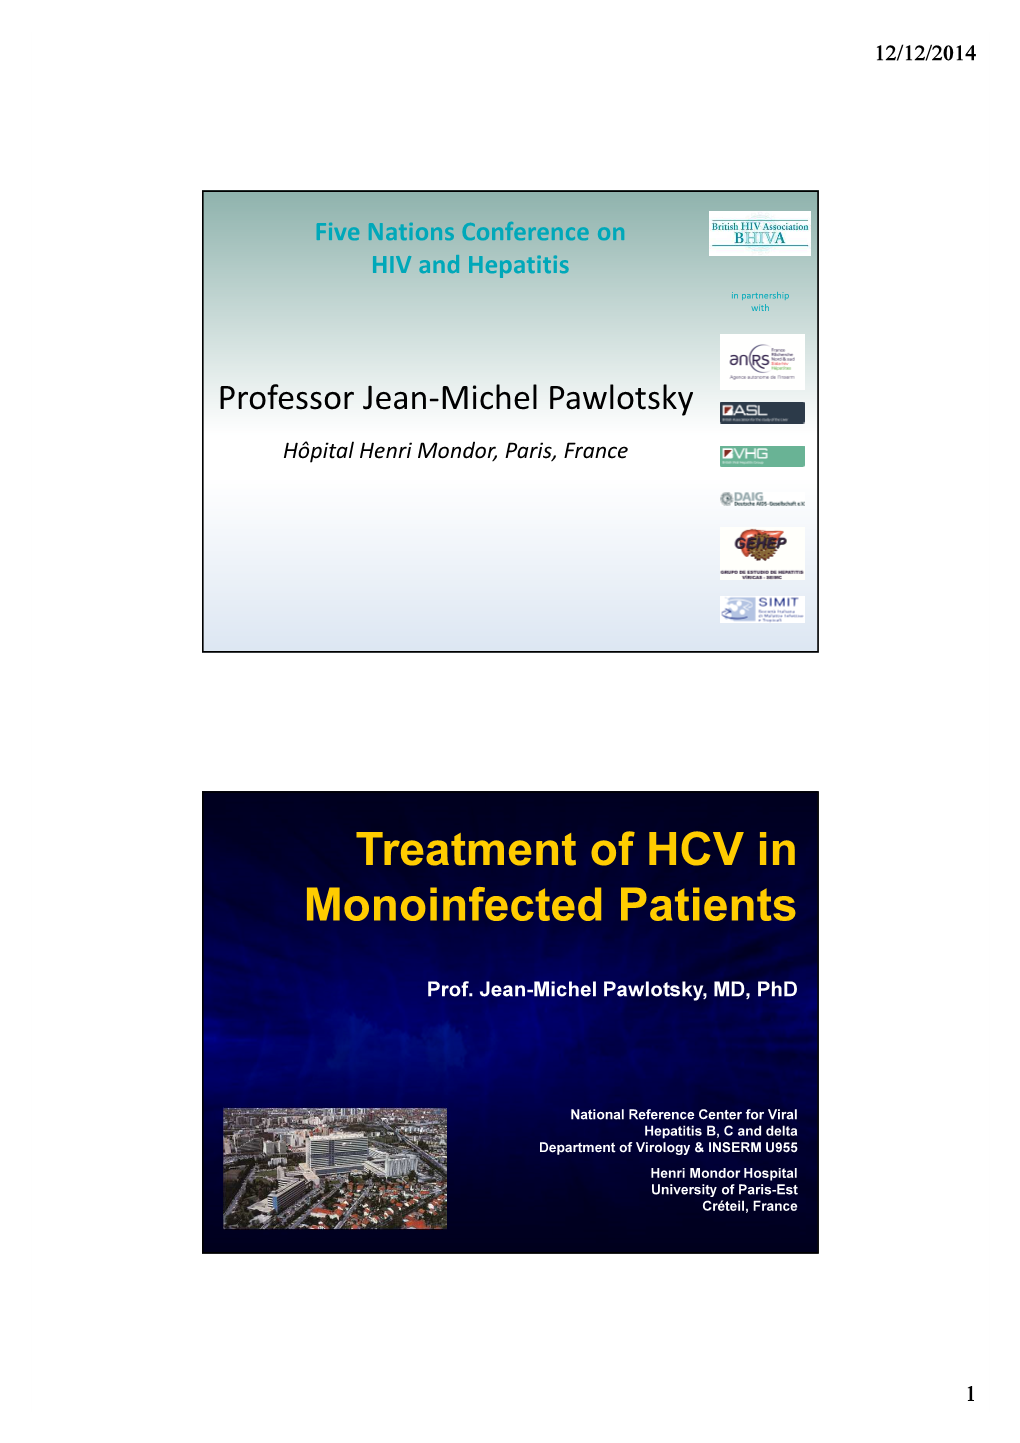 Treatment of HCV in Monoinfected Patients